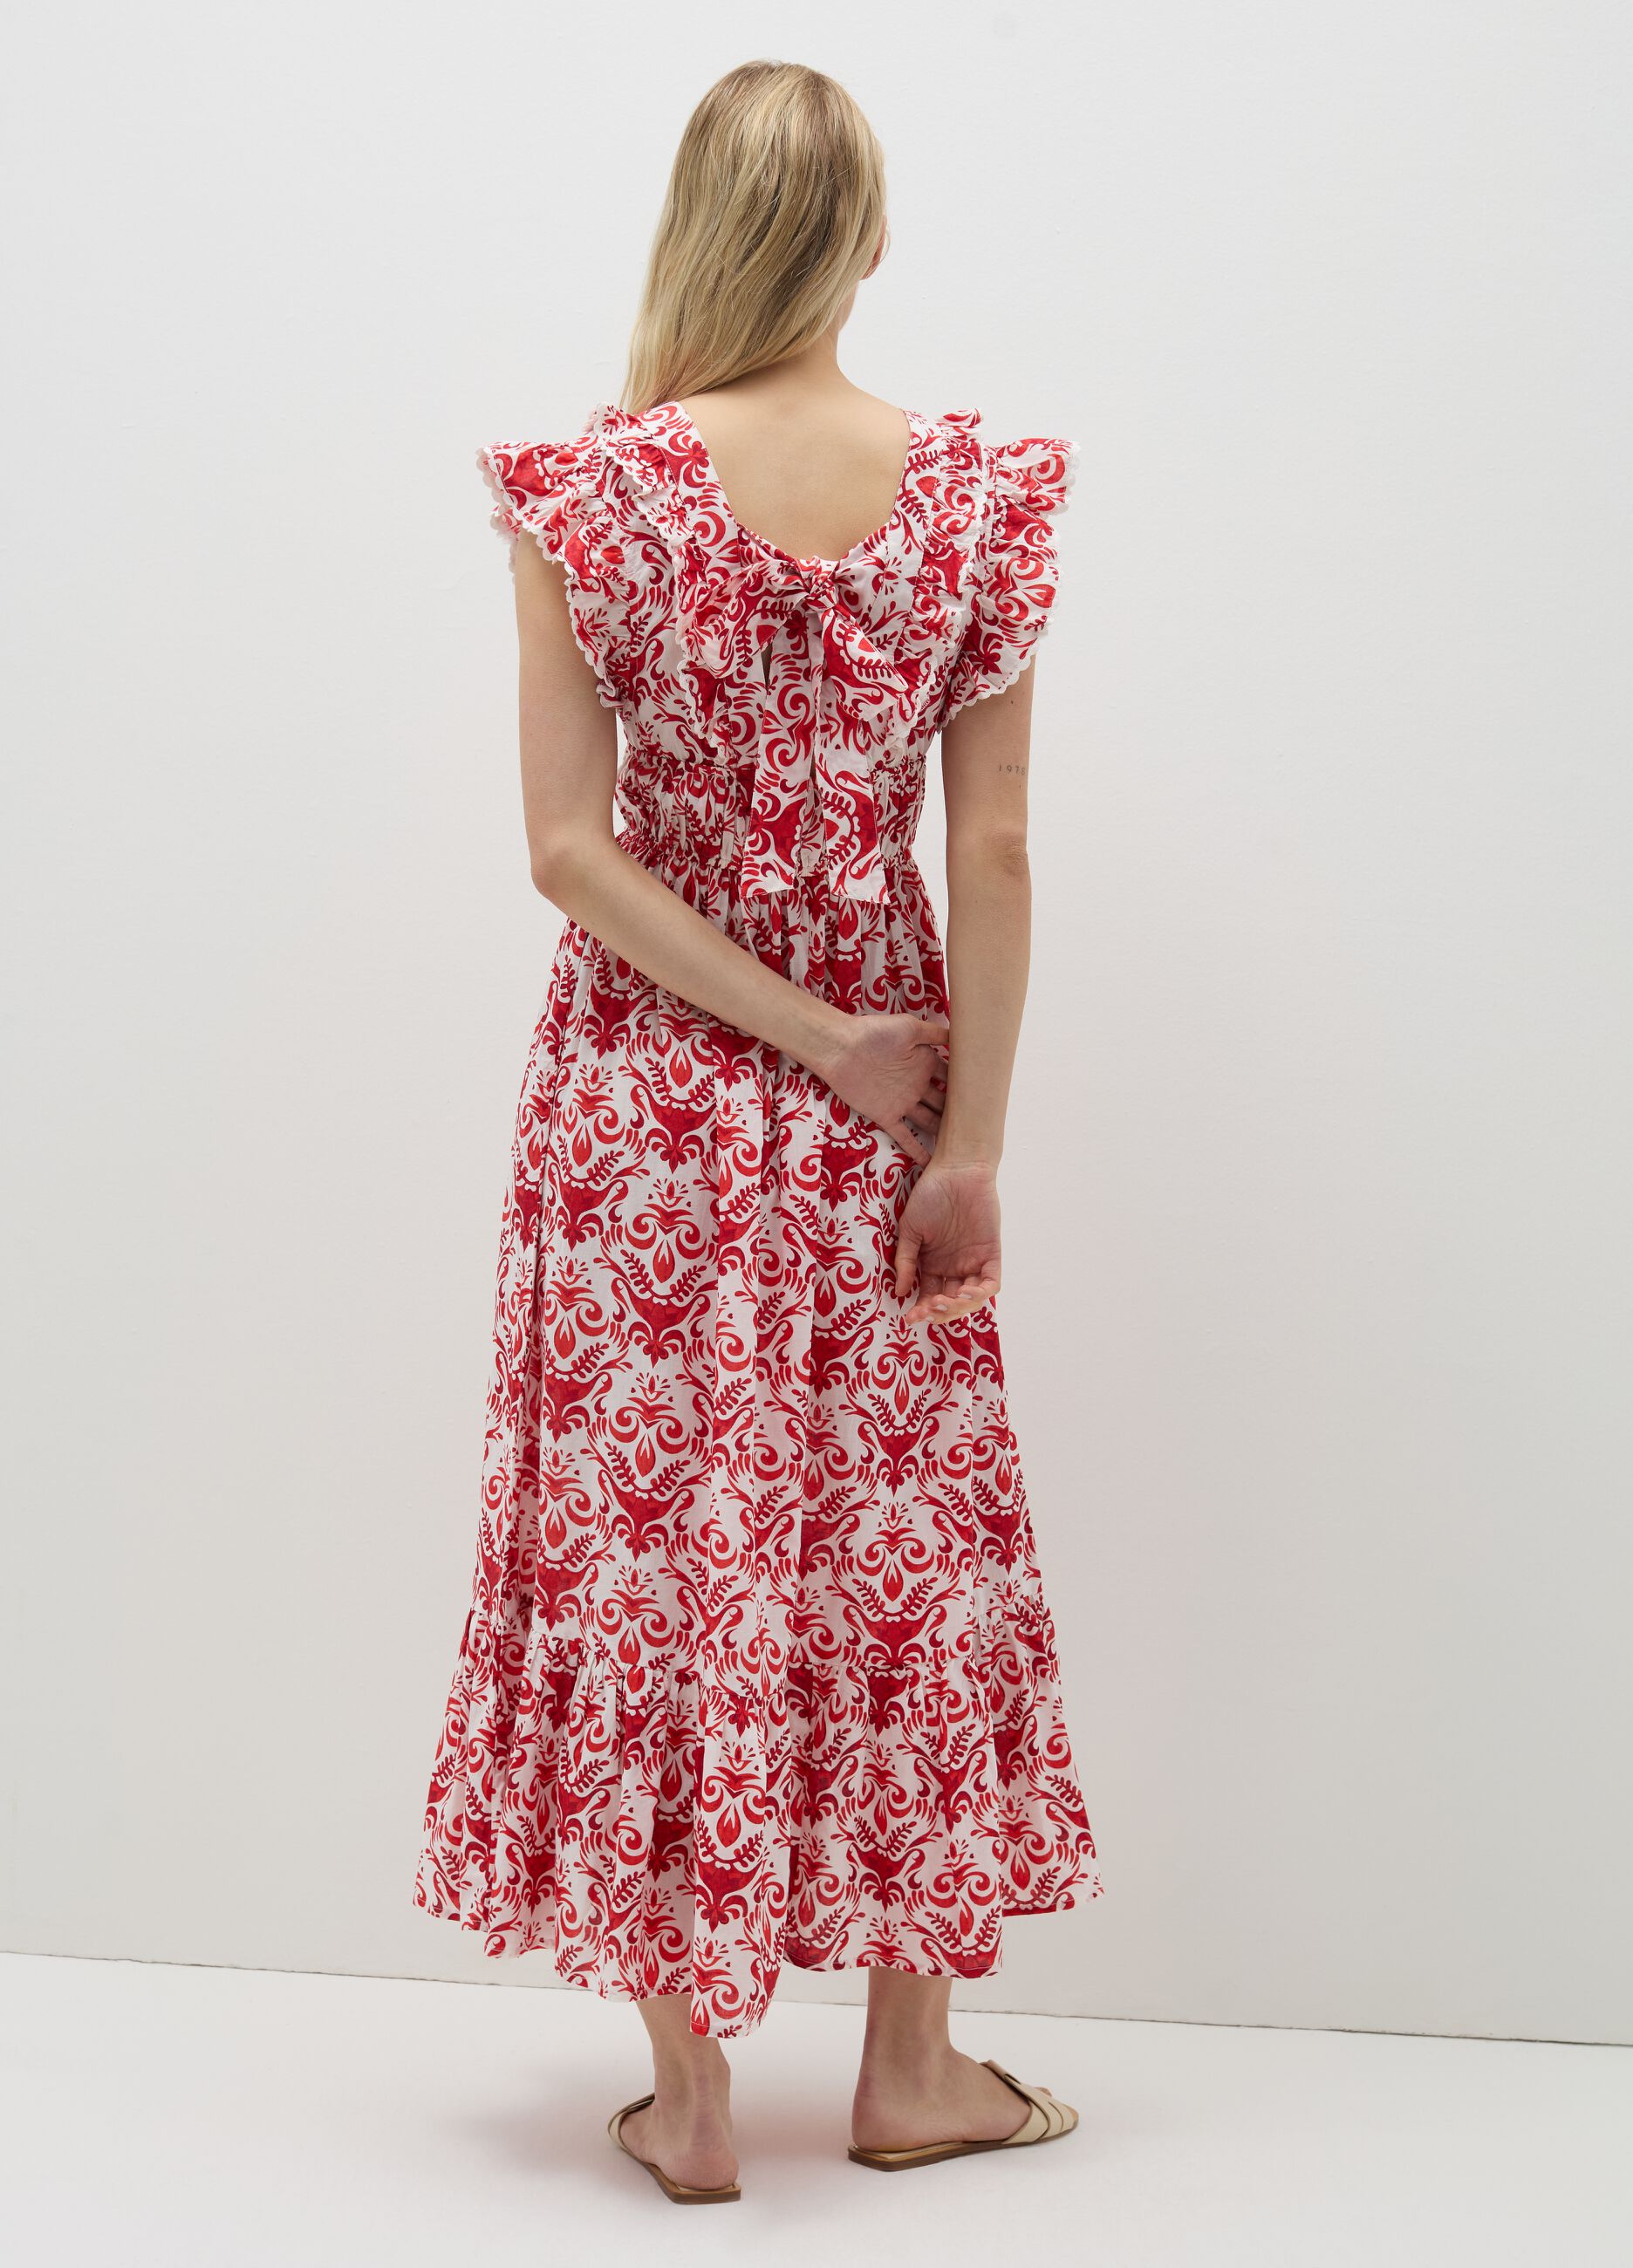 Positano summer dress with print and flounce